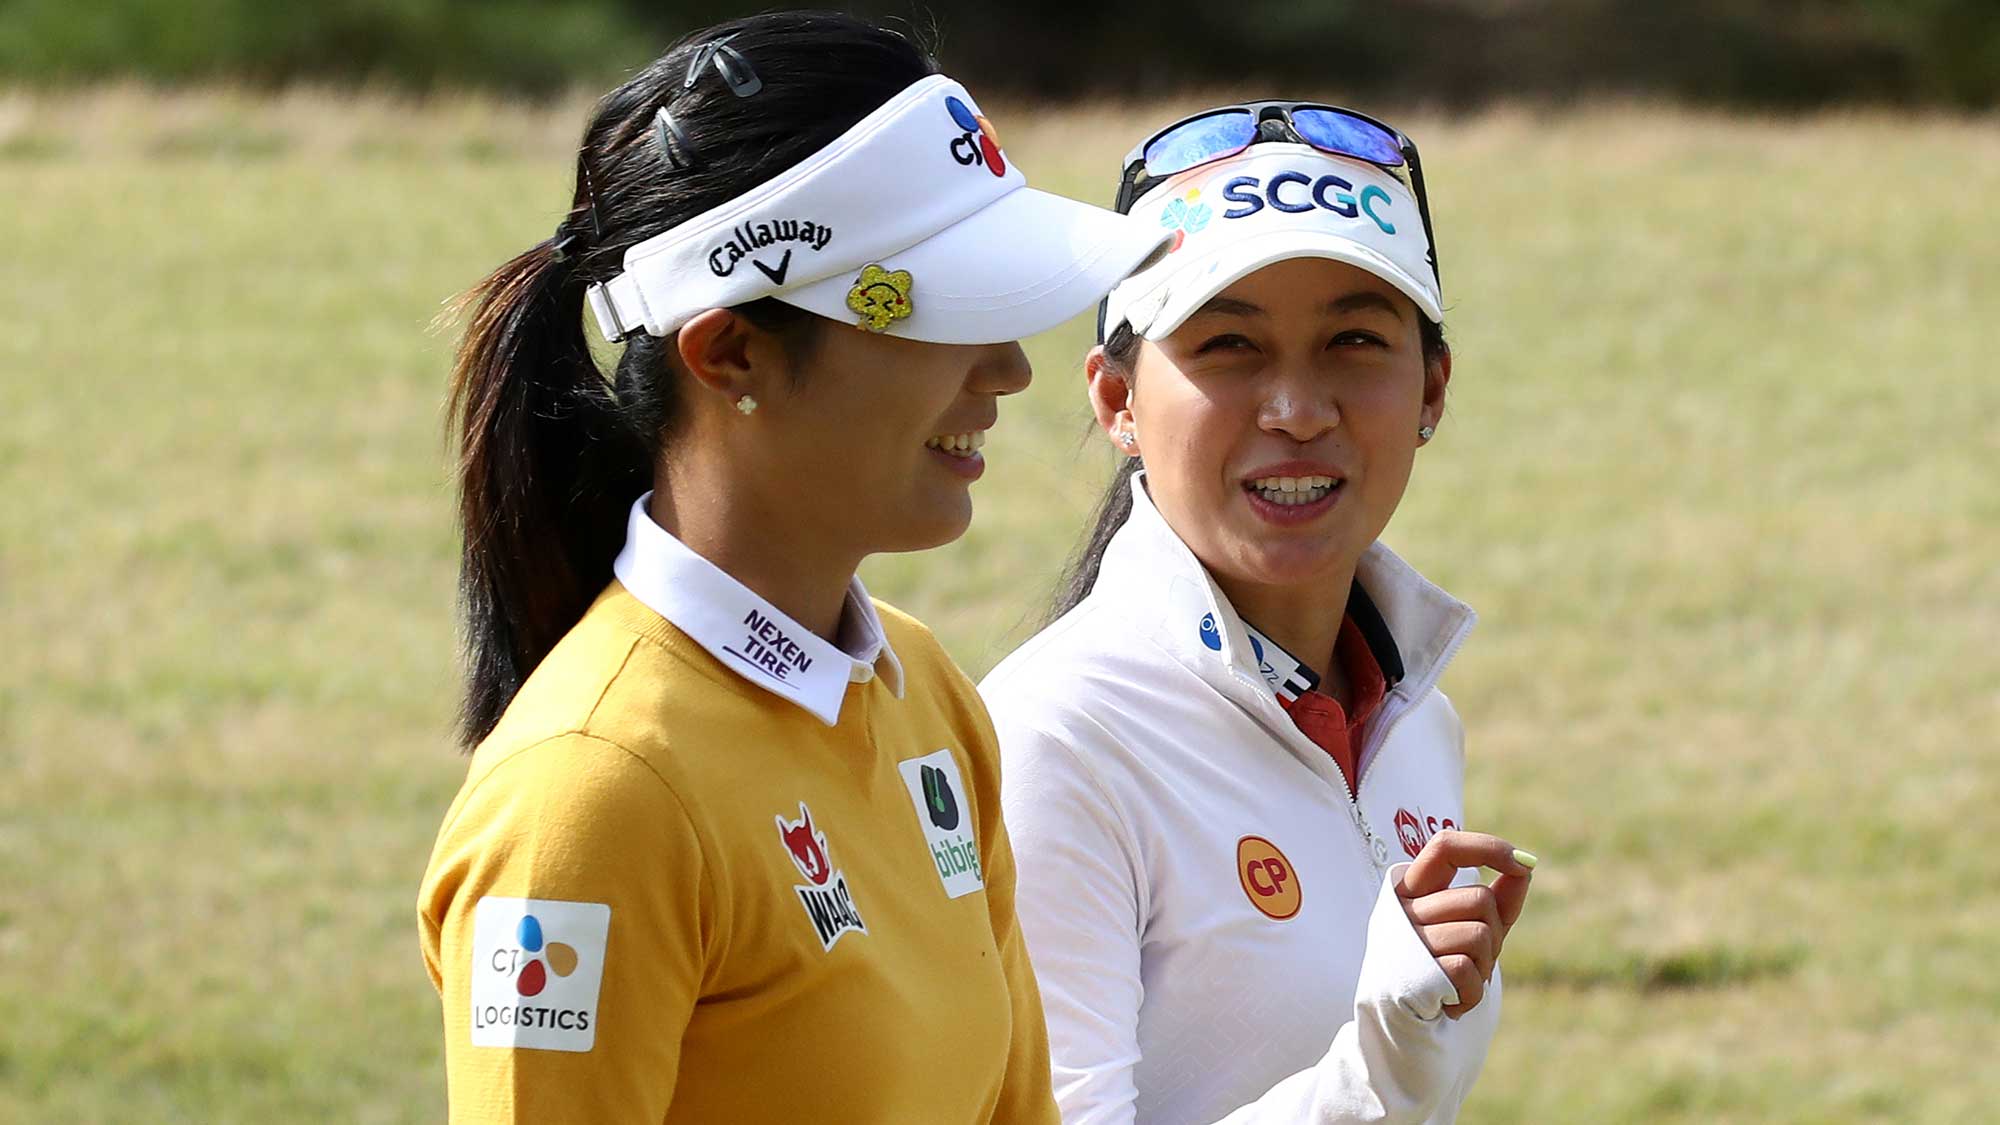 Atthaya Thitikul (R) of Thailand and Yaeeun Hong of South Korea chat as they walk on the ninth fairway during the second round of the BMW Ladies Championship